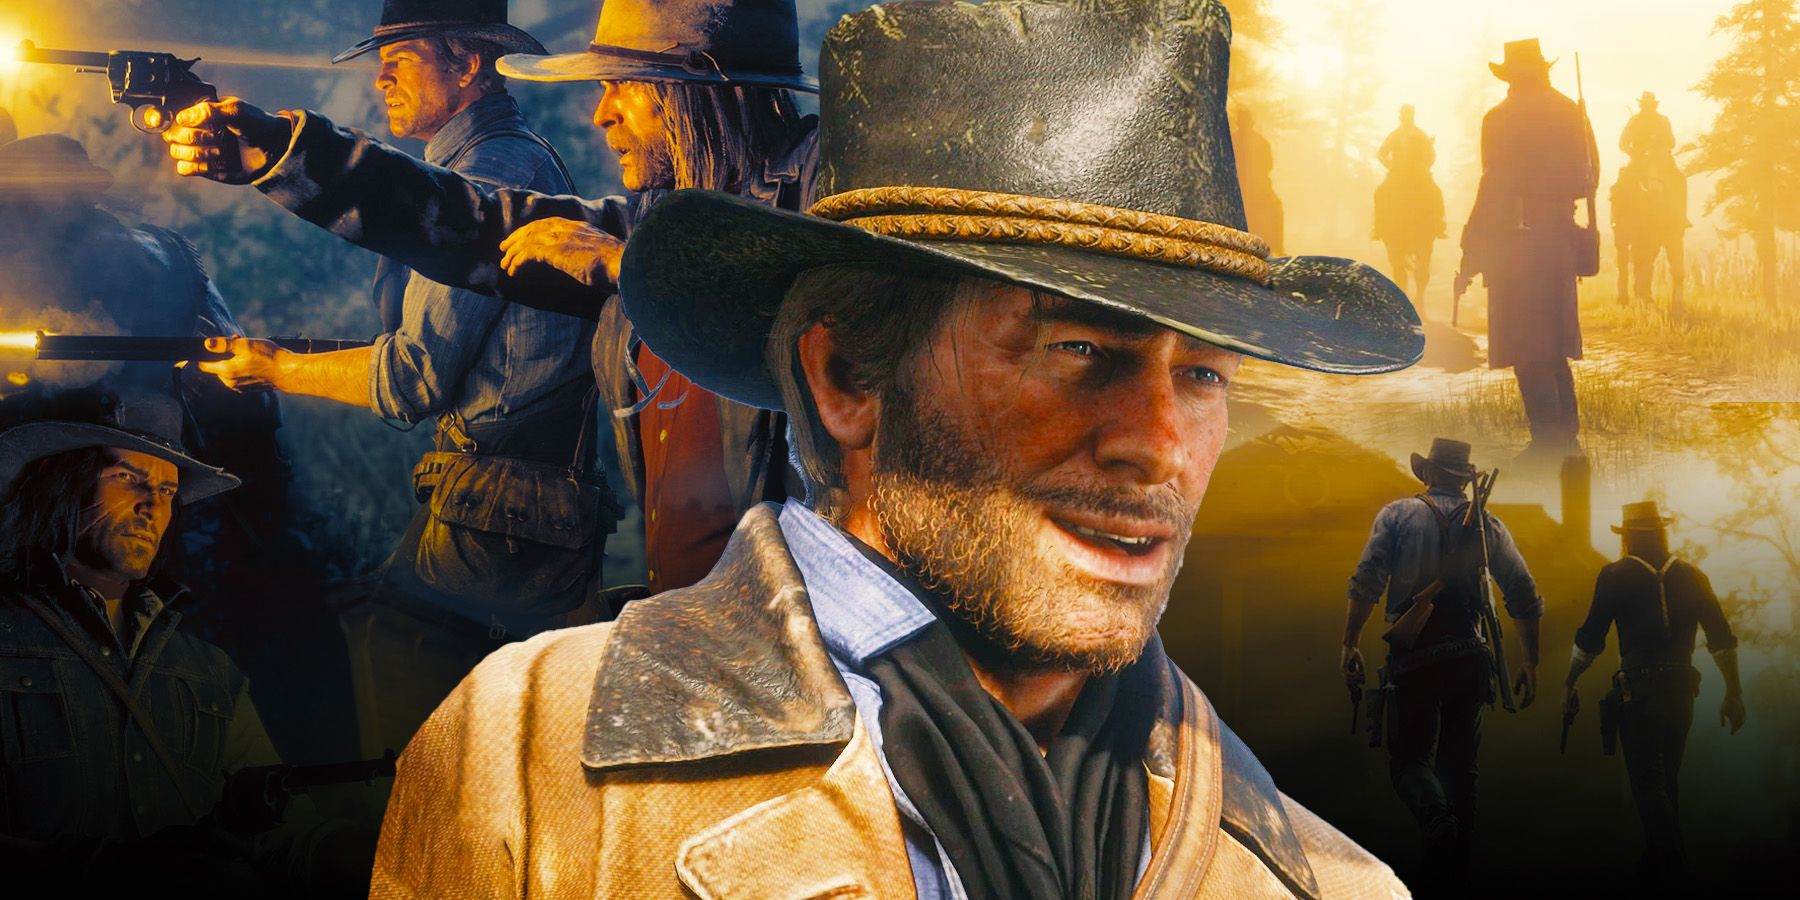 Arthur Morgan from Red Dead Redemption 2 smiles with several characters in the background.